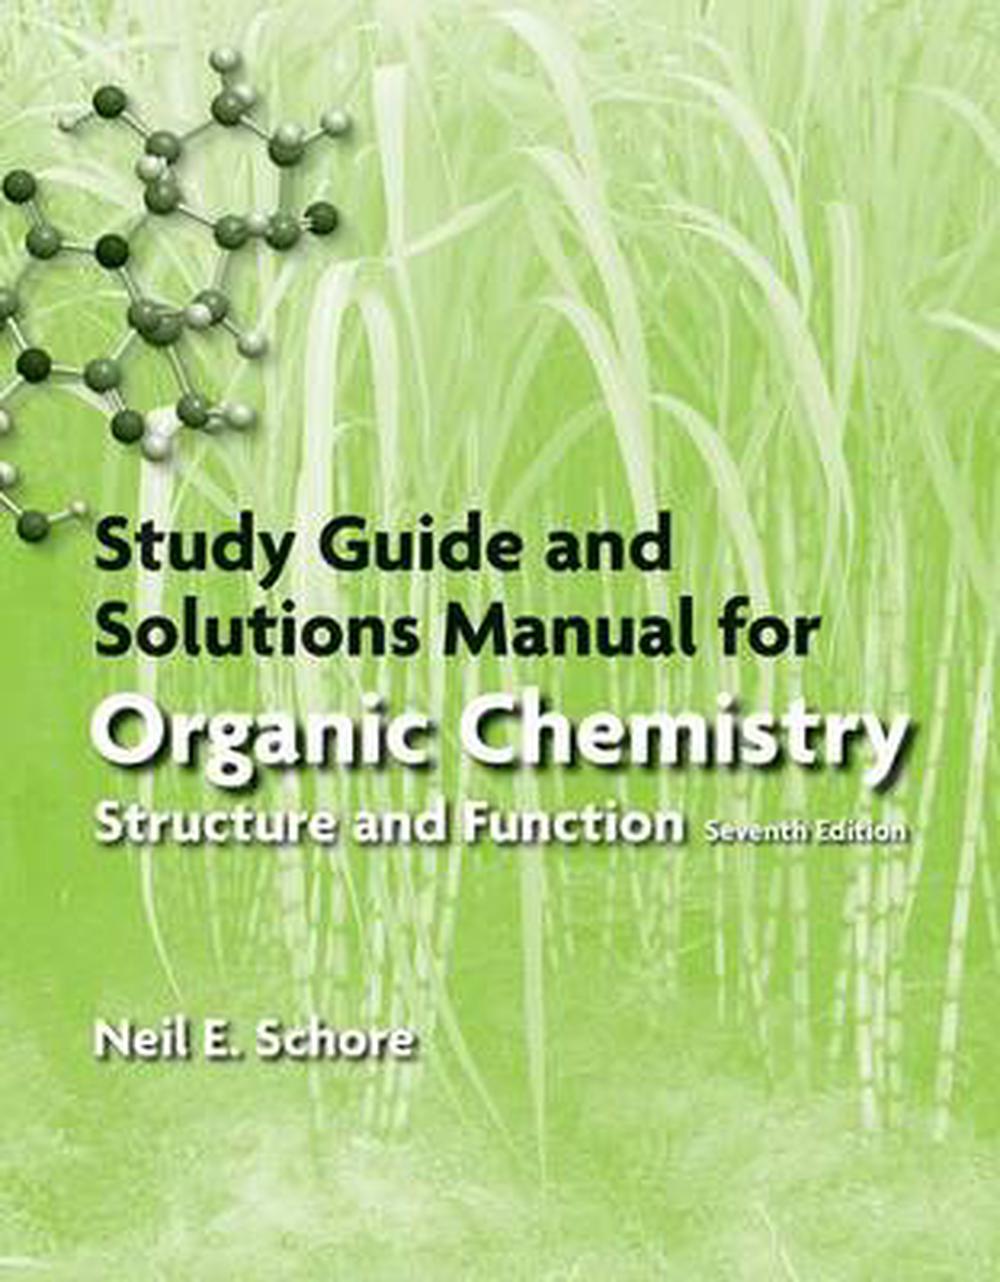 Study Guide/Solutions Manual for Organic Chemistry by Peter Vollhardt